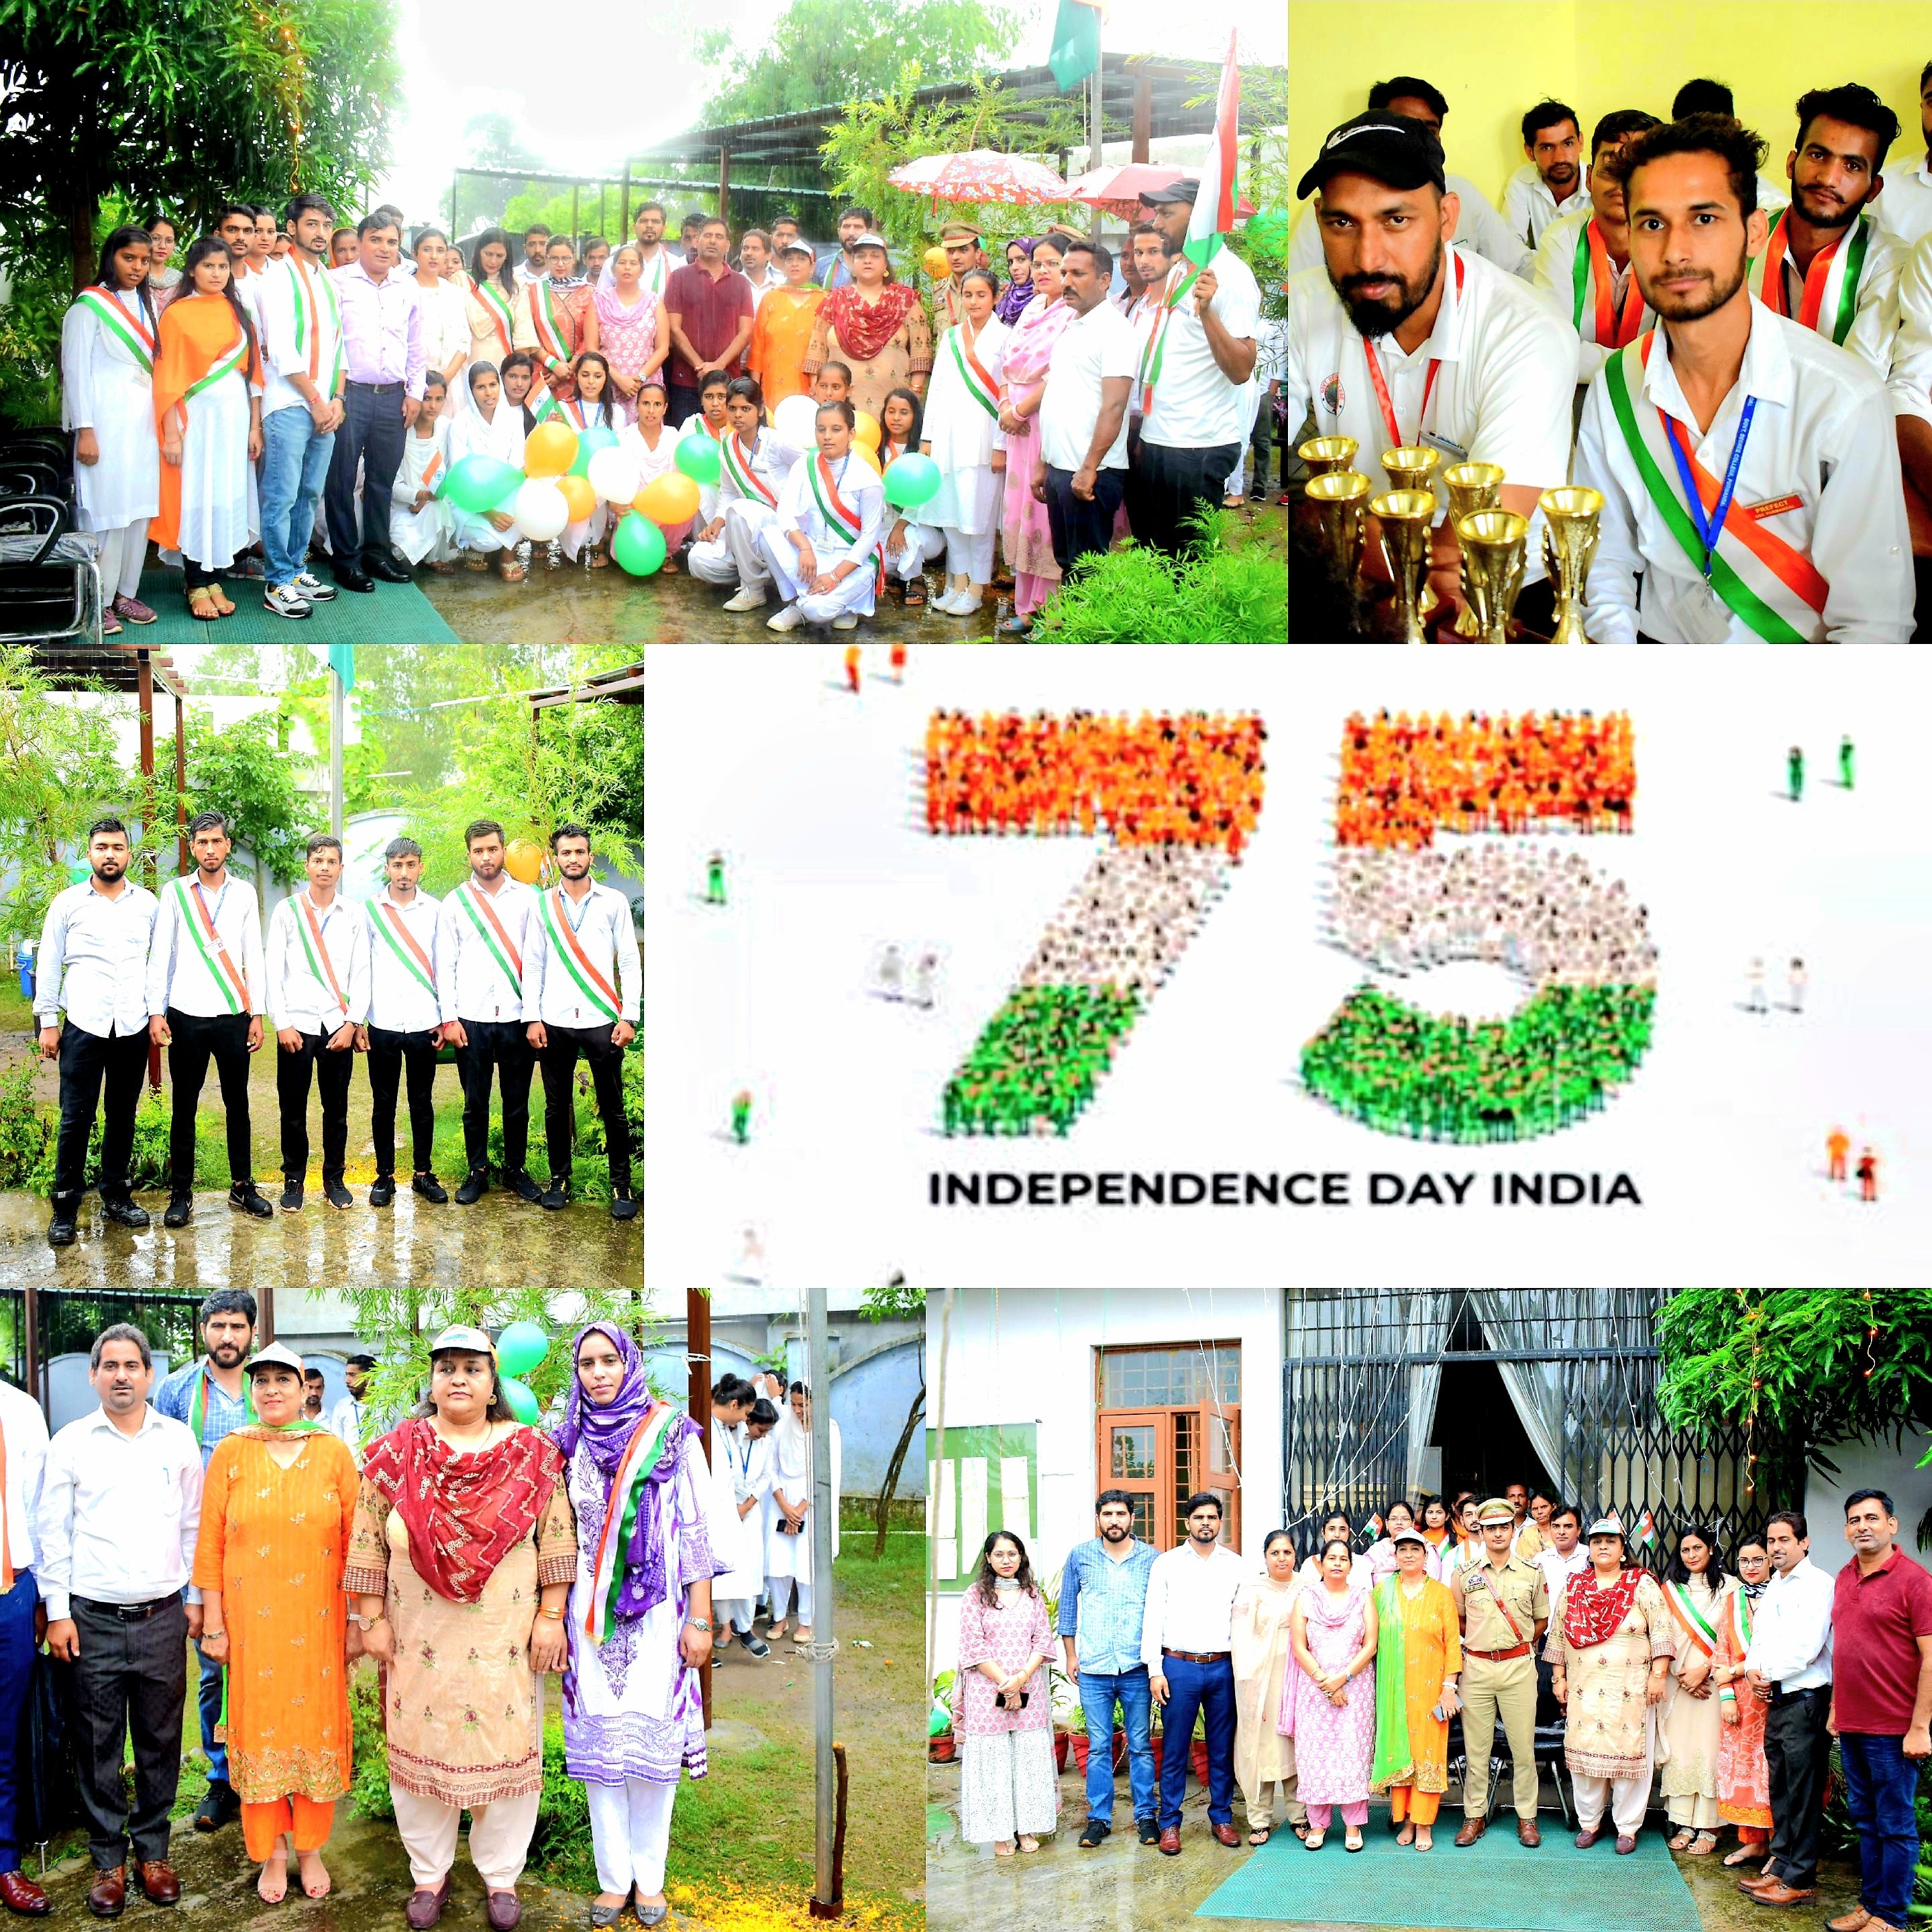 GDC Purmandal celebrated 75th Year of Independence